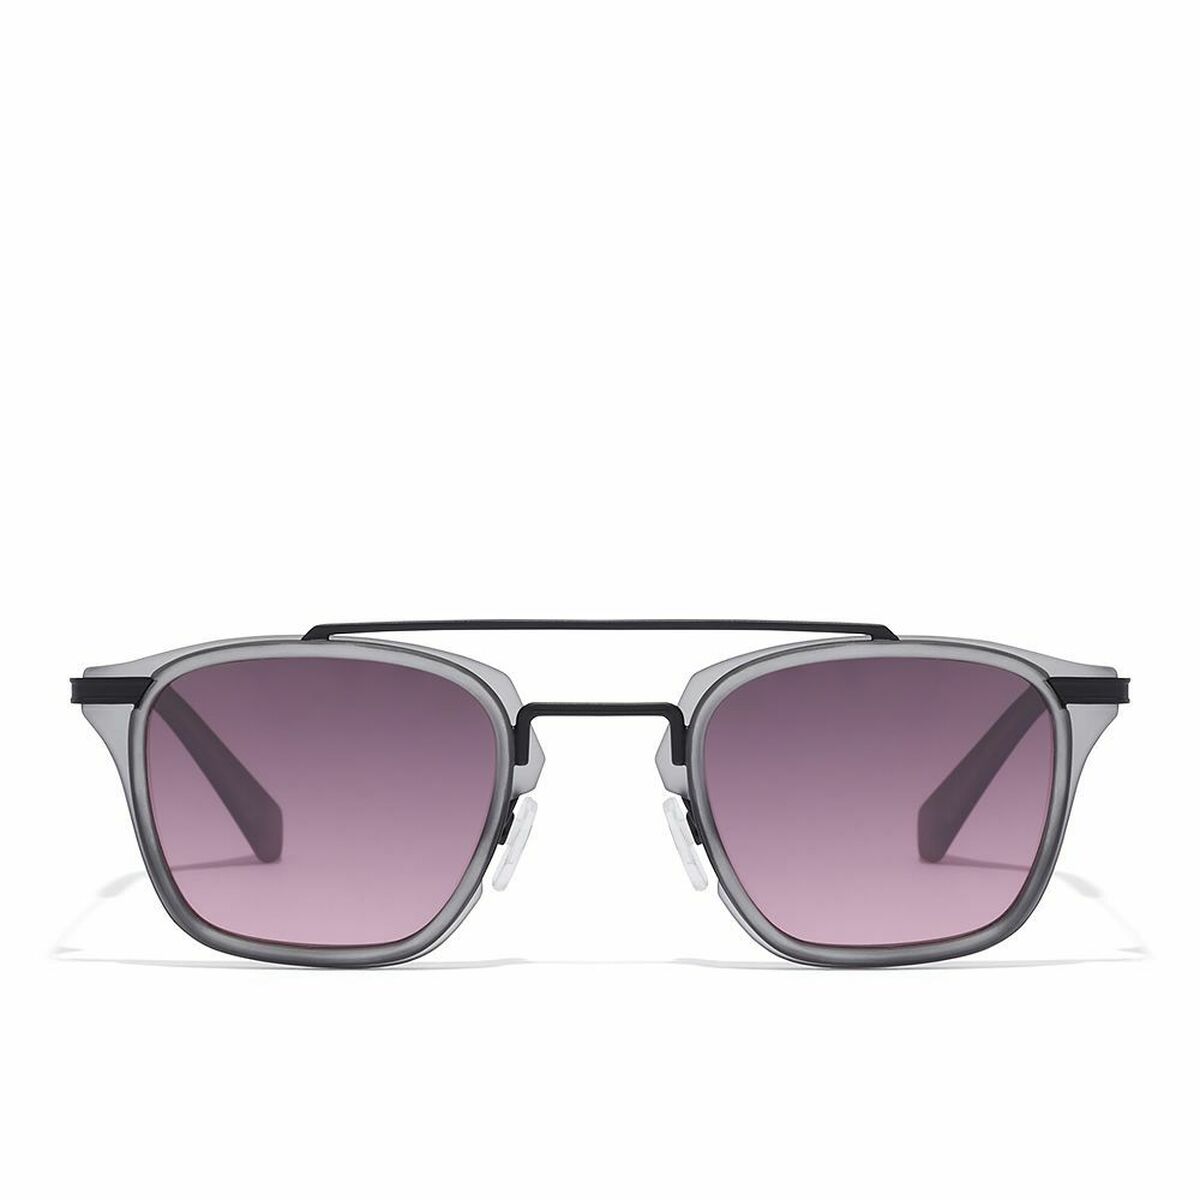 Unisex Sunglasses Hawkers Rushhour Pink (Ø 48 mm)